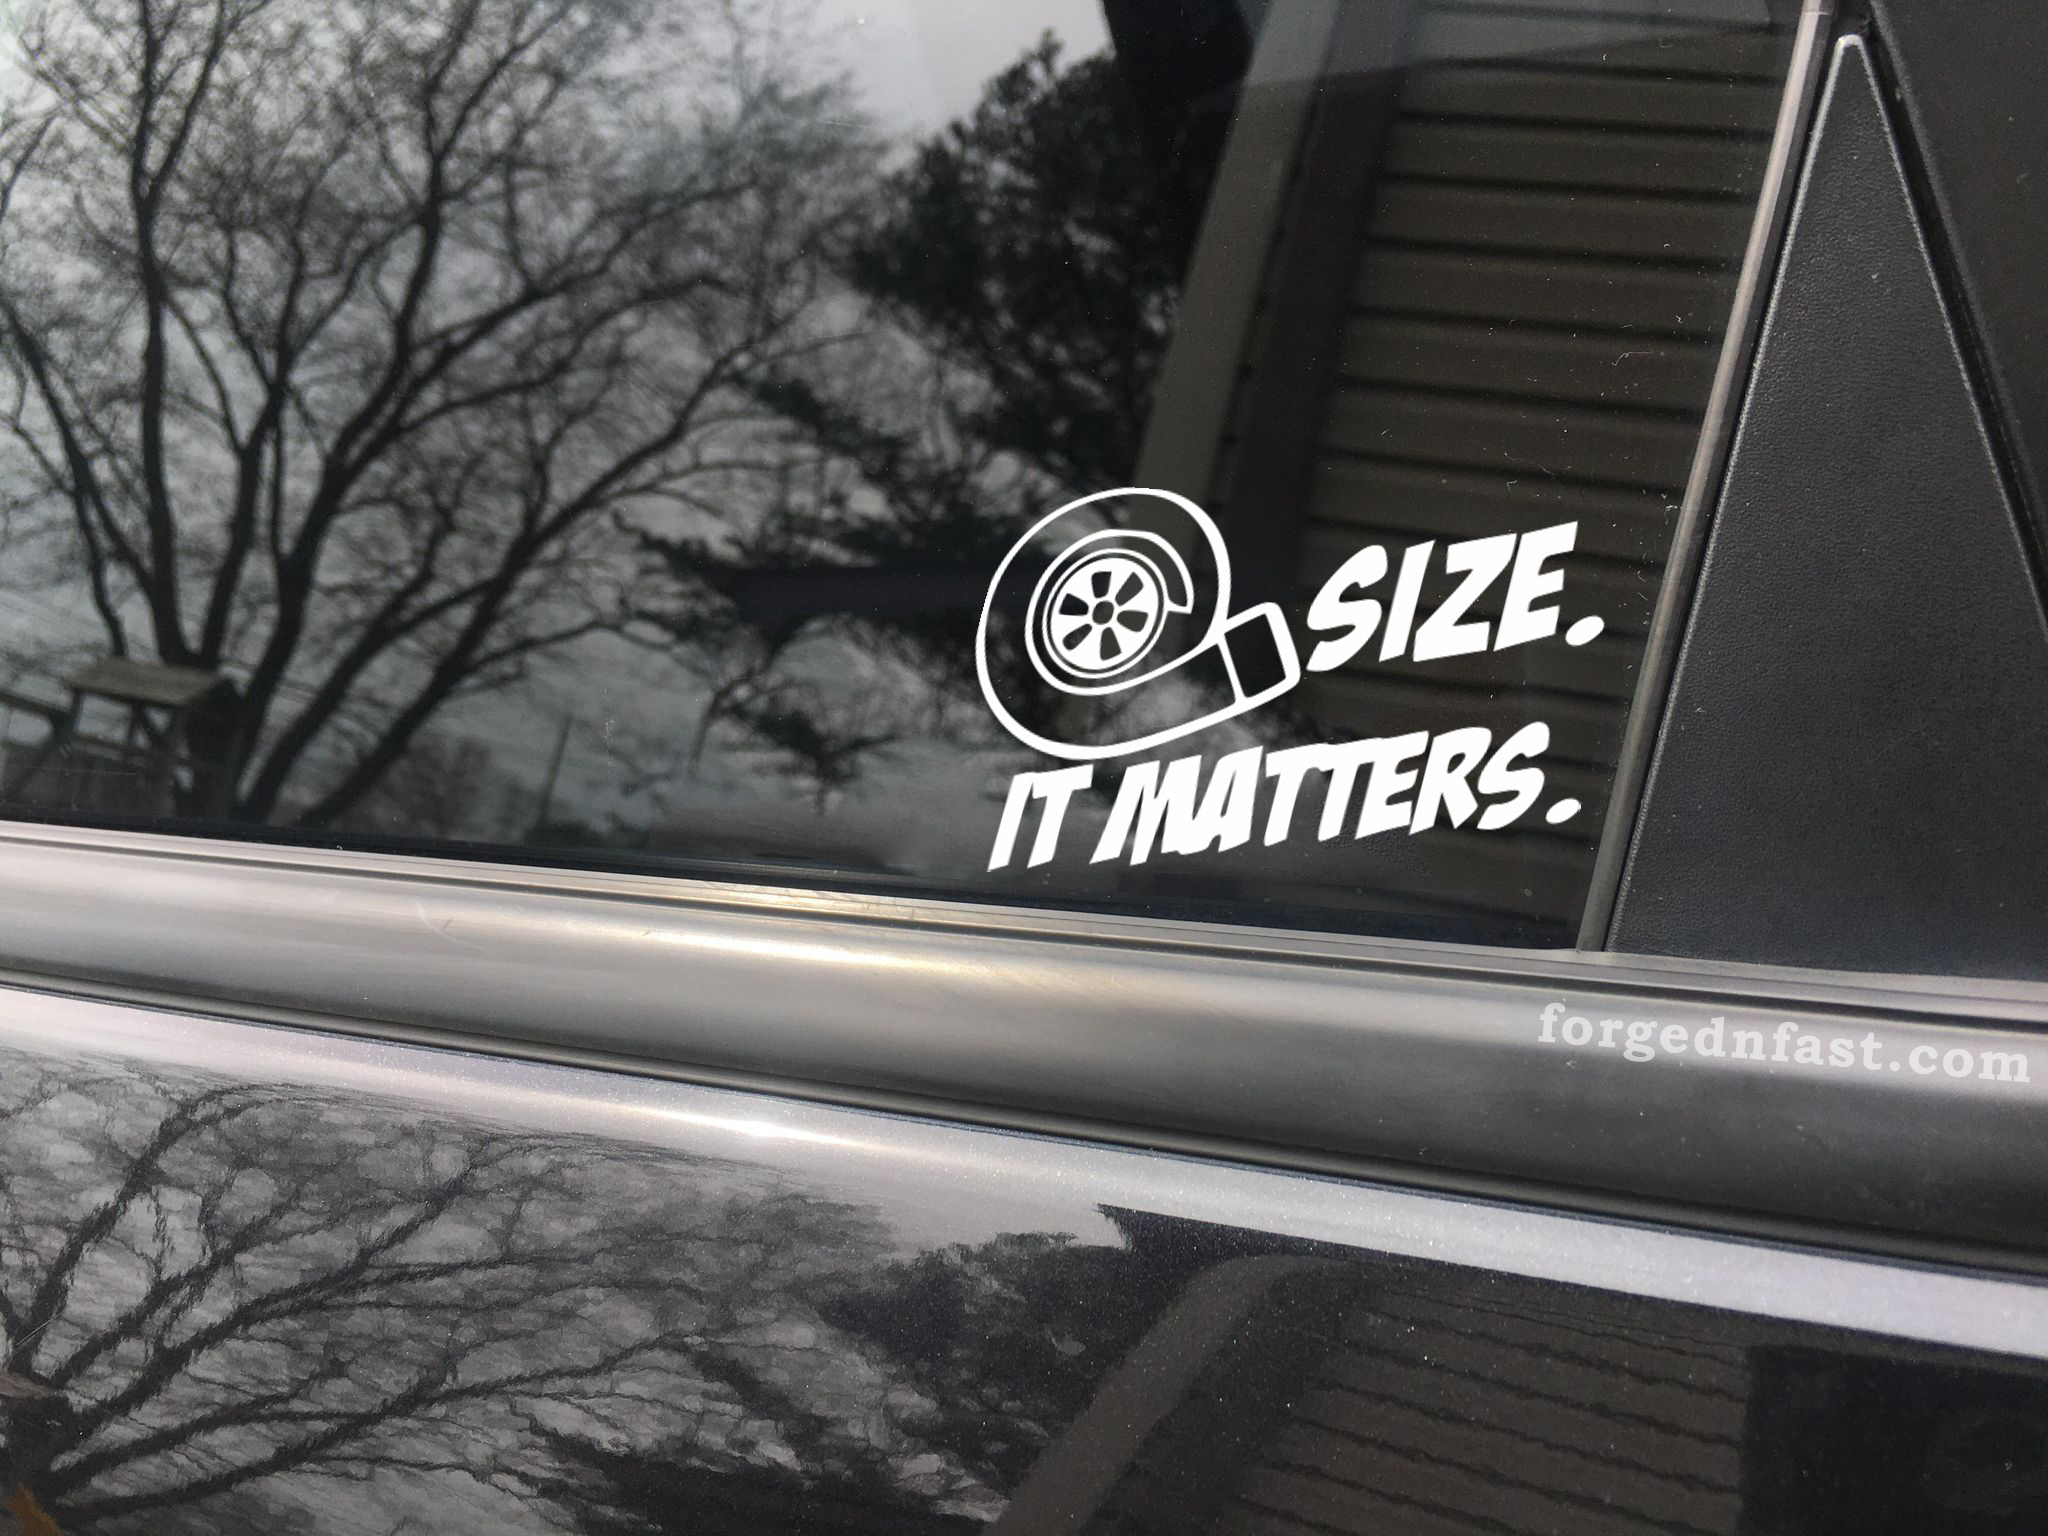 Big Turbo Car Sticker Turbo Size Matters Boost Turbo Boosted Hot Rod Hot Hatch 